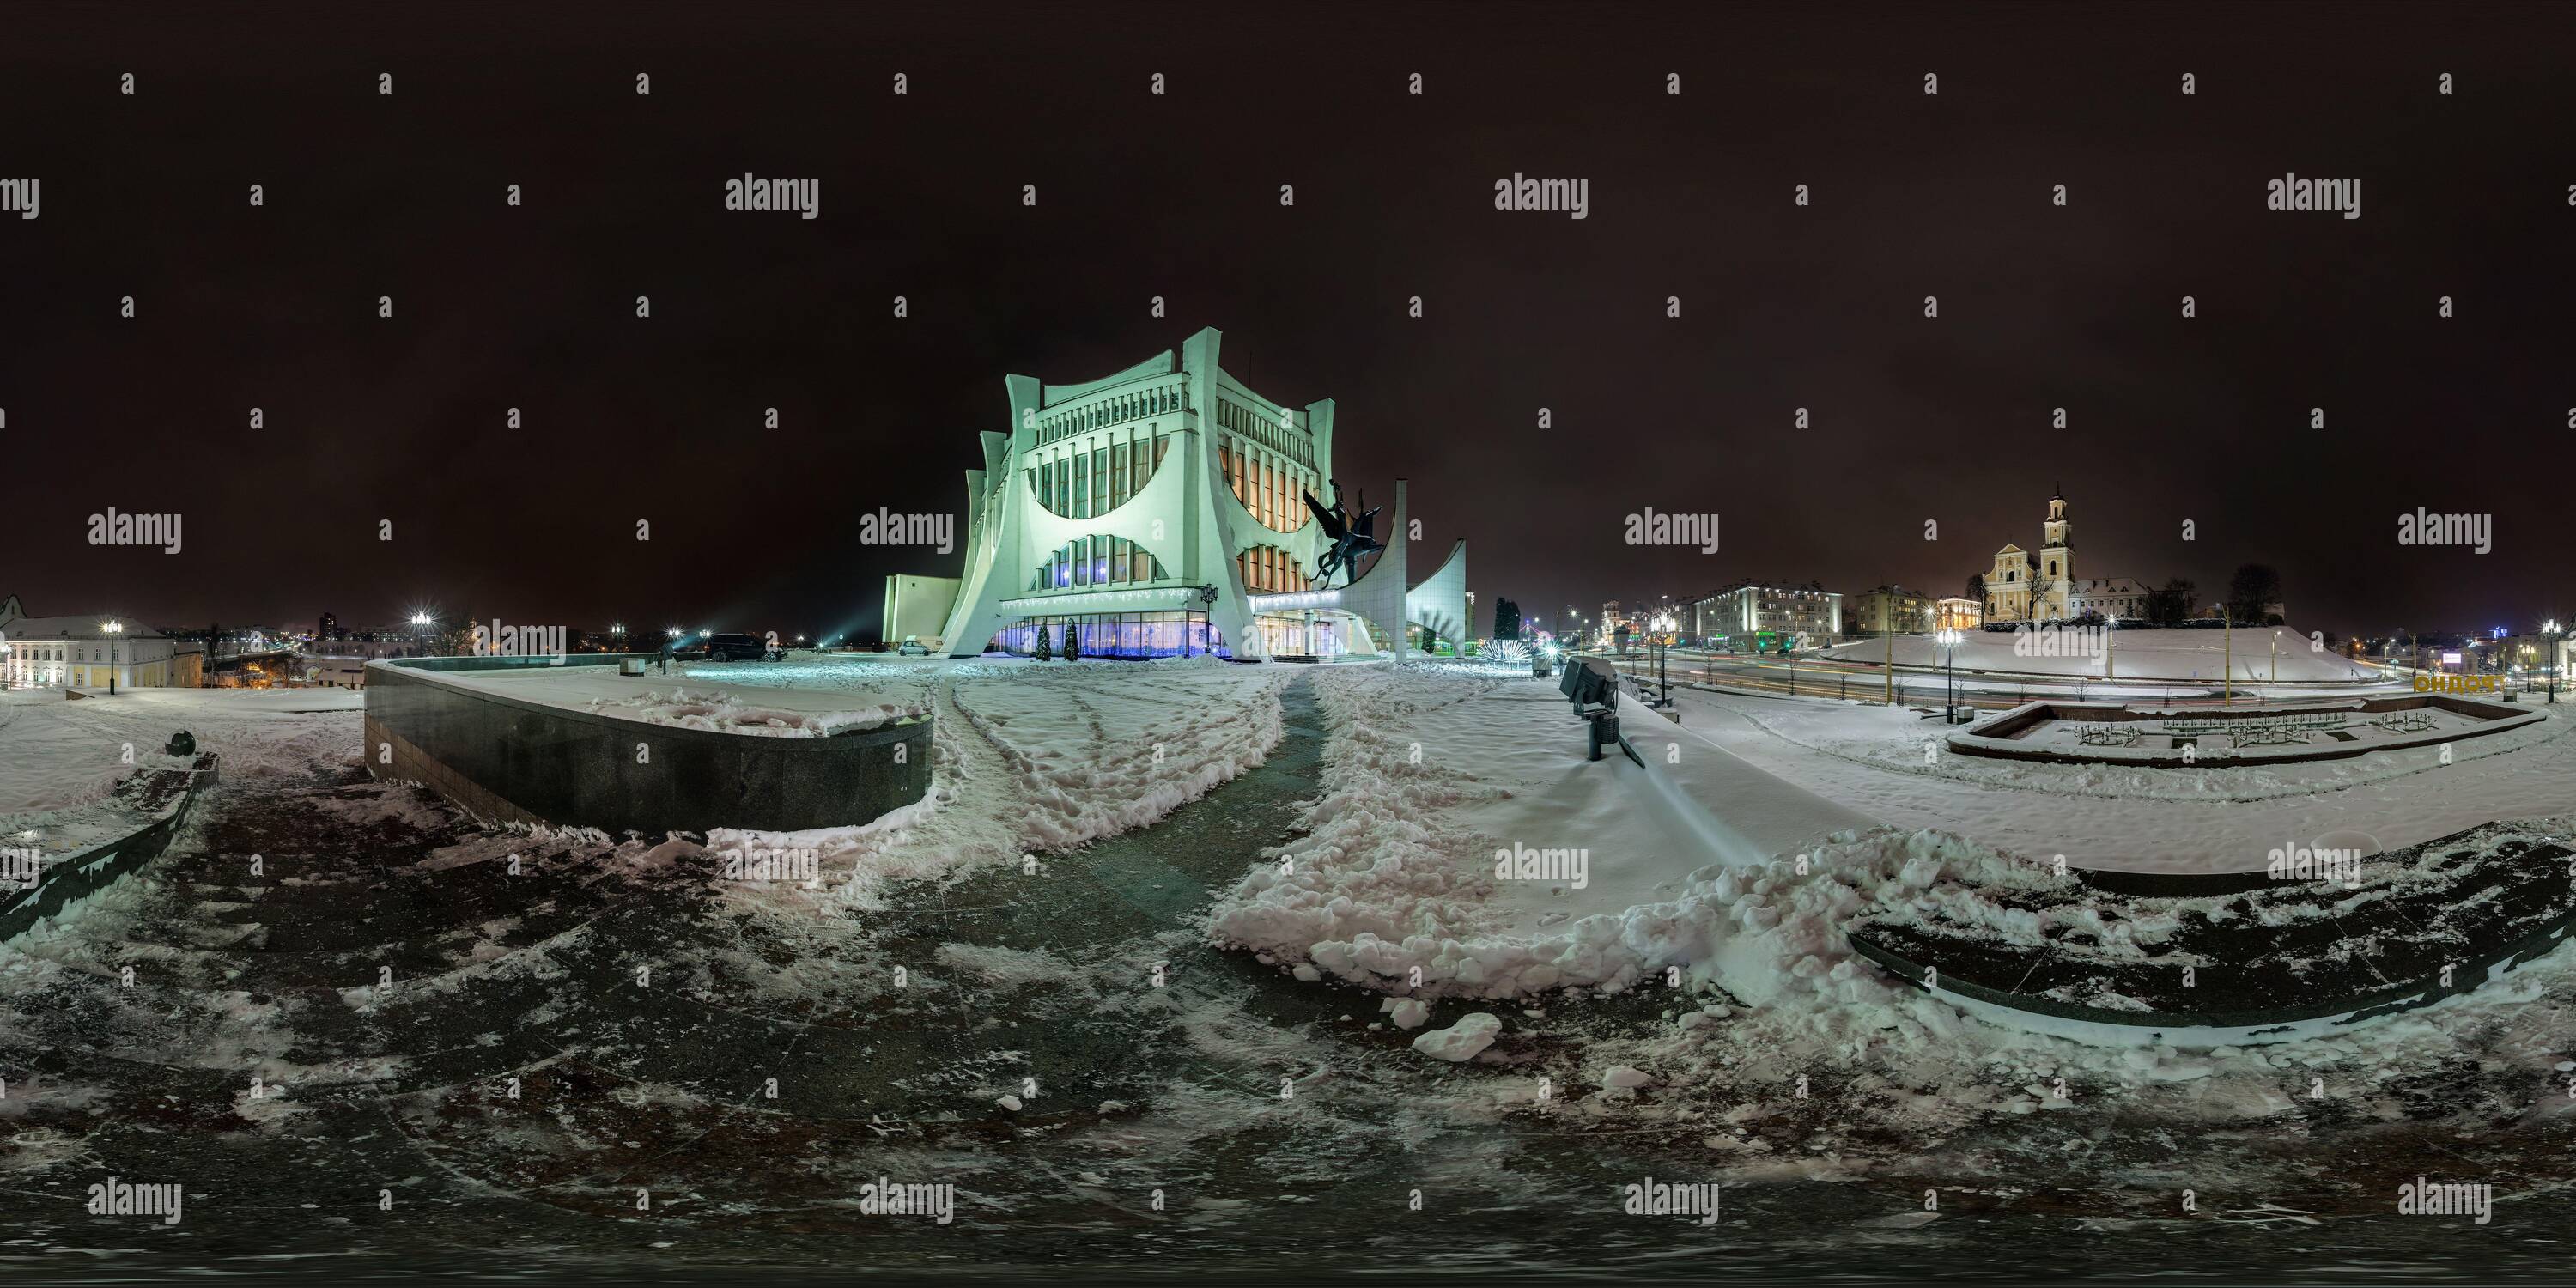 360 degree panoramic view of GRODNO, BELARUS - DECEMBER 2018: Full seamless night hdri panorama 360 degrees angle view on night street with illuminations on new Year in equirectan